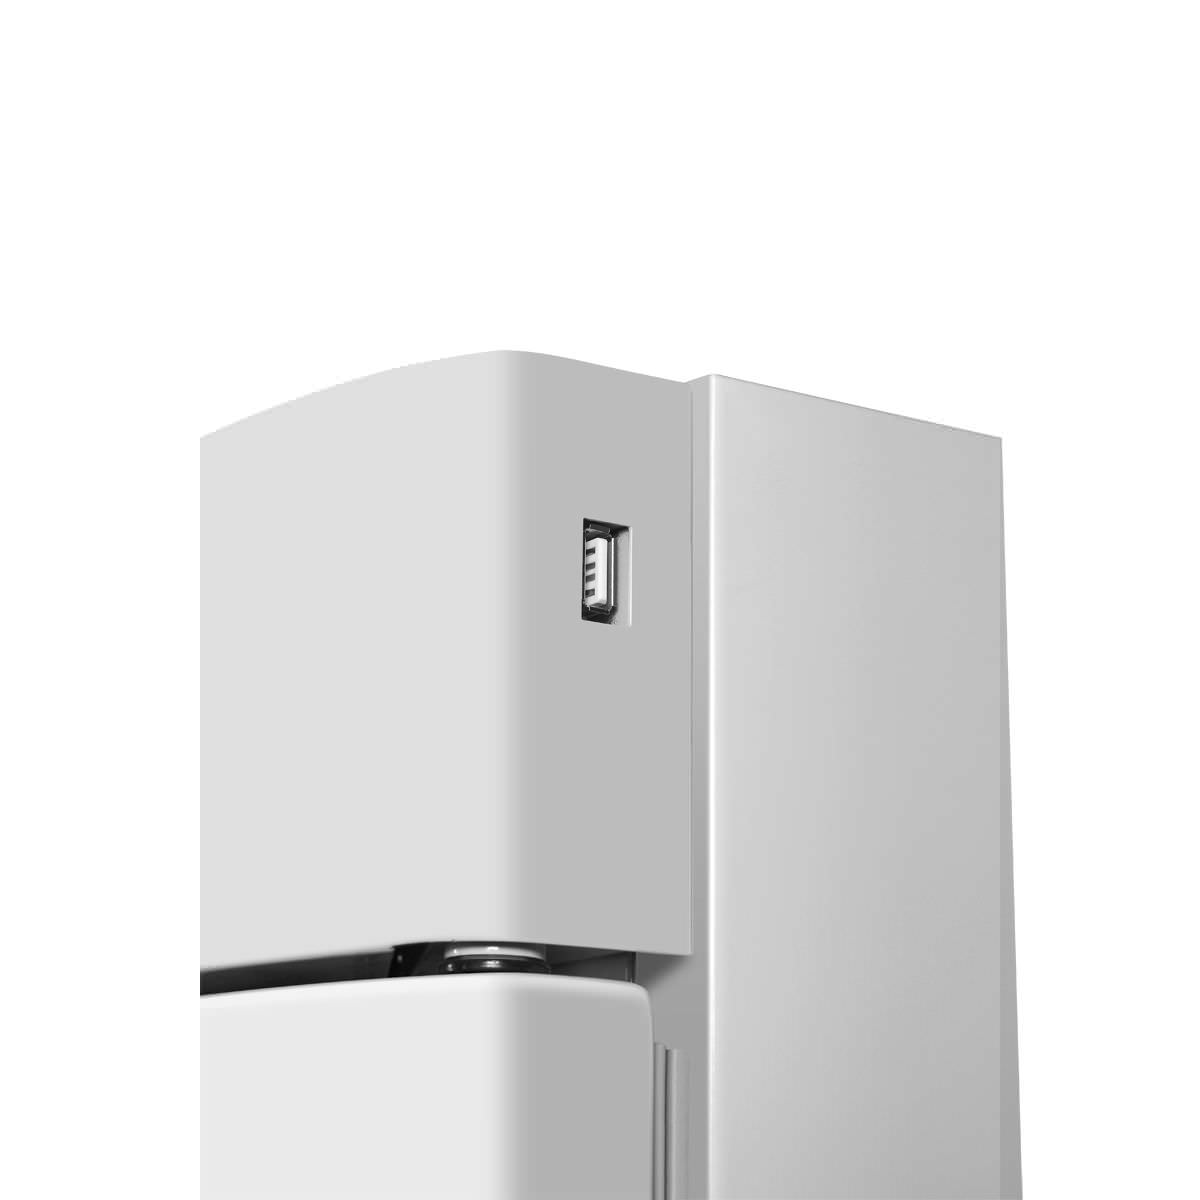 Laboratory refrigerator-freezer / upright / 2-door 2 °C ... 8 °C, -40 °C ... -20 °C, 185 L, 97 L | HYCD-282 Haier Medical and Laboratory Products